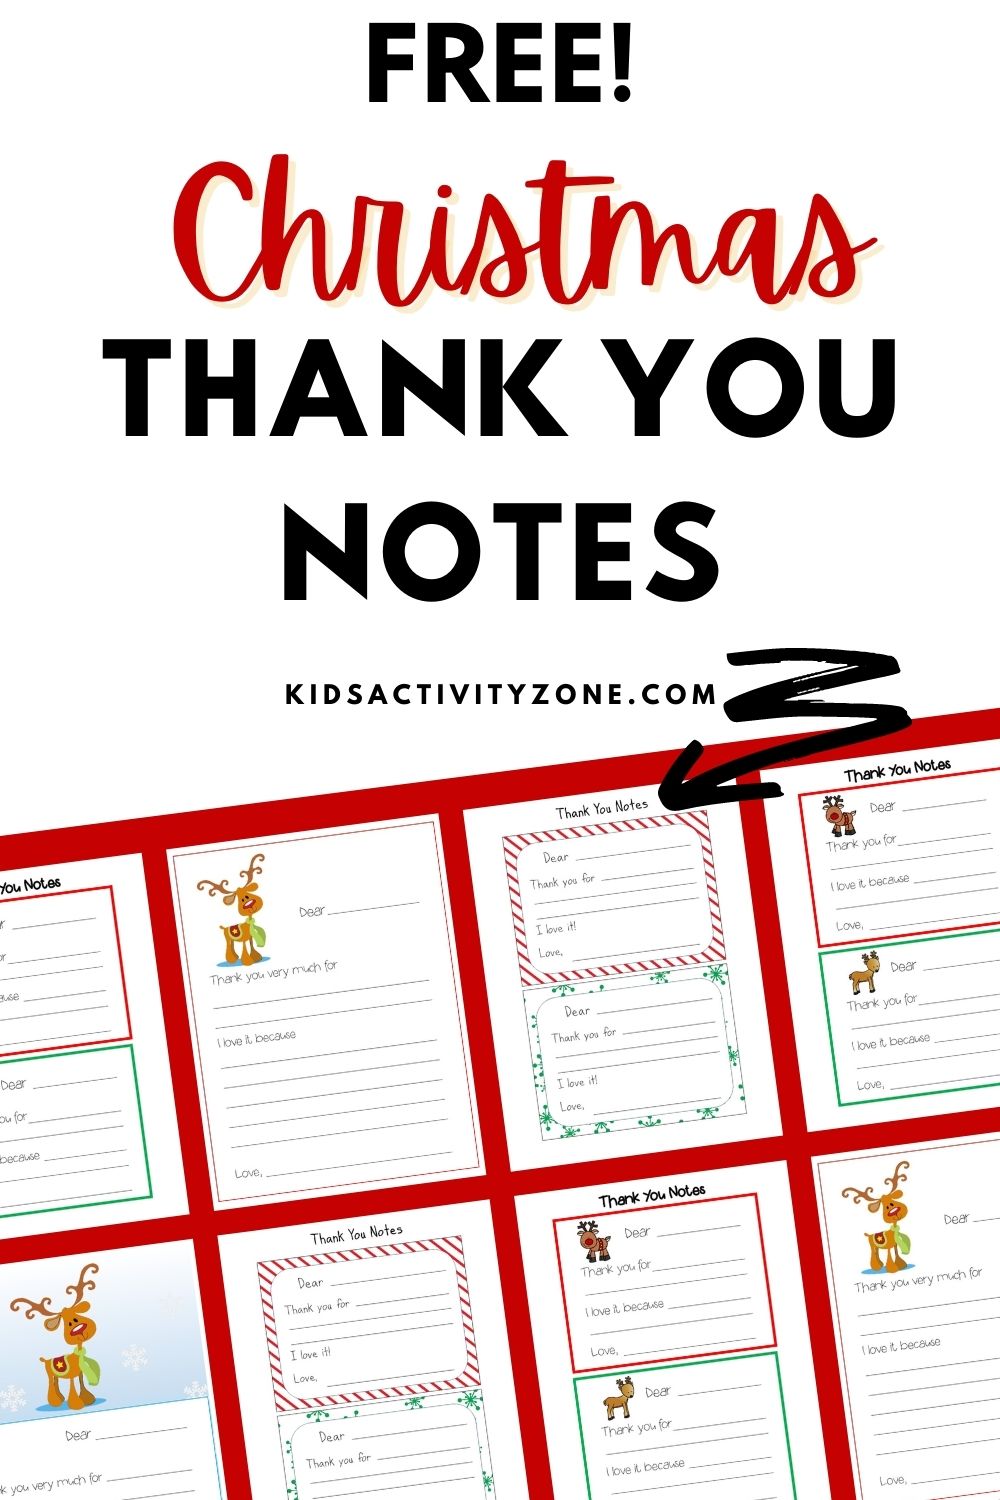 Christmas Thank You Printables are perfect for young children learning how to write. After the Christmas presents are unwrapped don't forget to fill out one of these easy thank you cards from the kids!